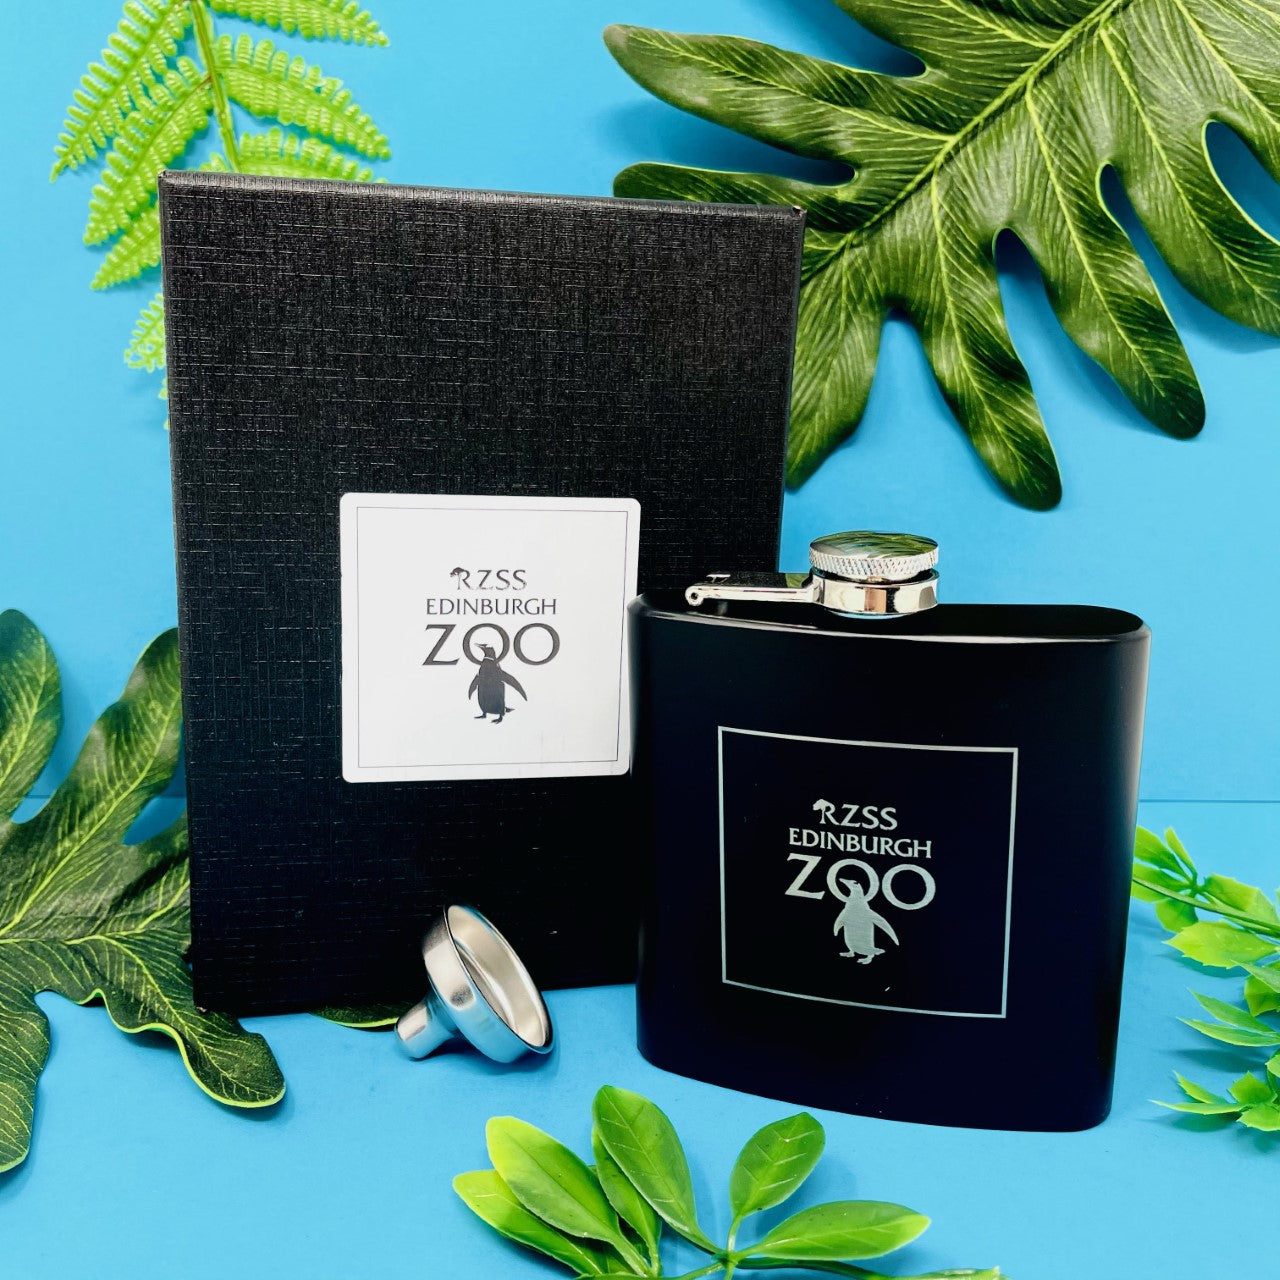 This brand new exclusive Edinburgh Zoo logo Hip flask is one of a kind. It comes in a bespoke gift box and is the ideal gift for a special occasion. 